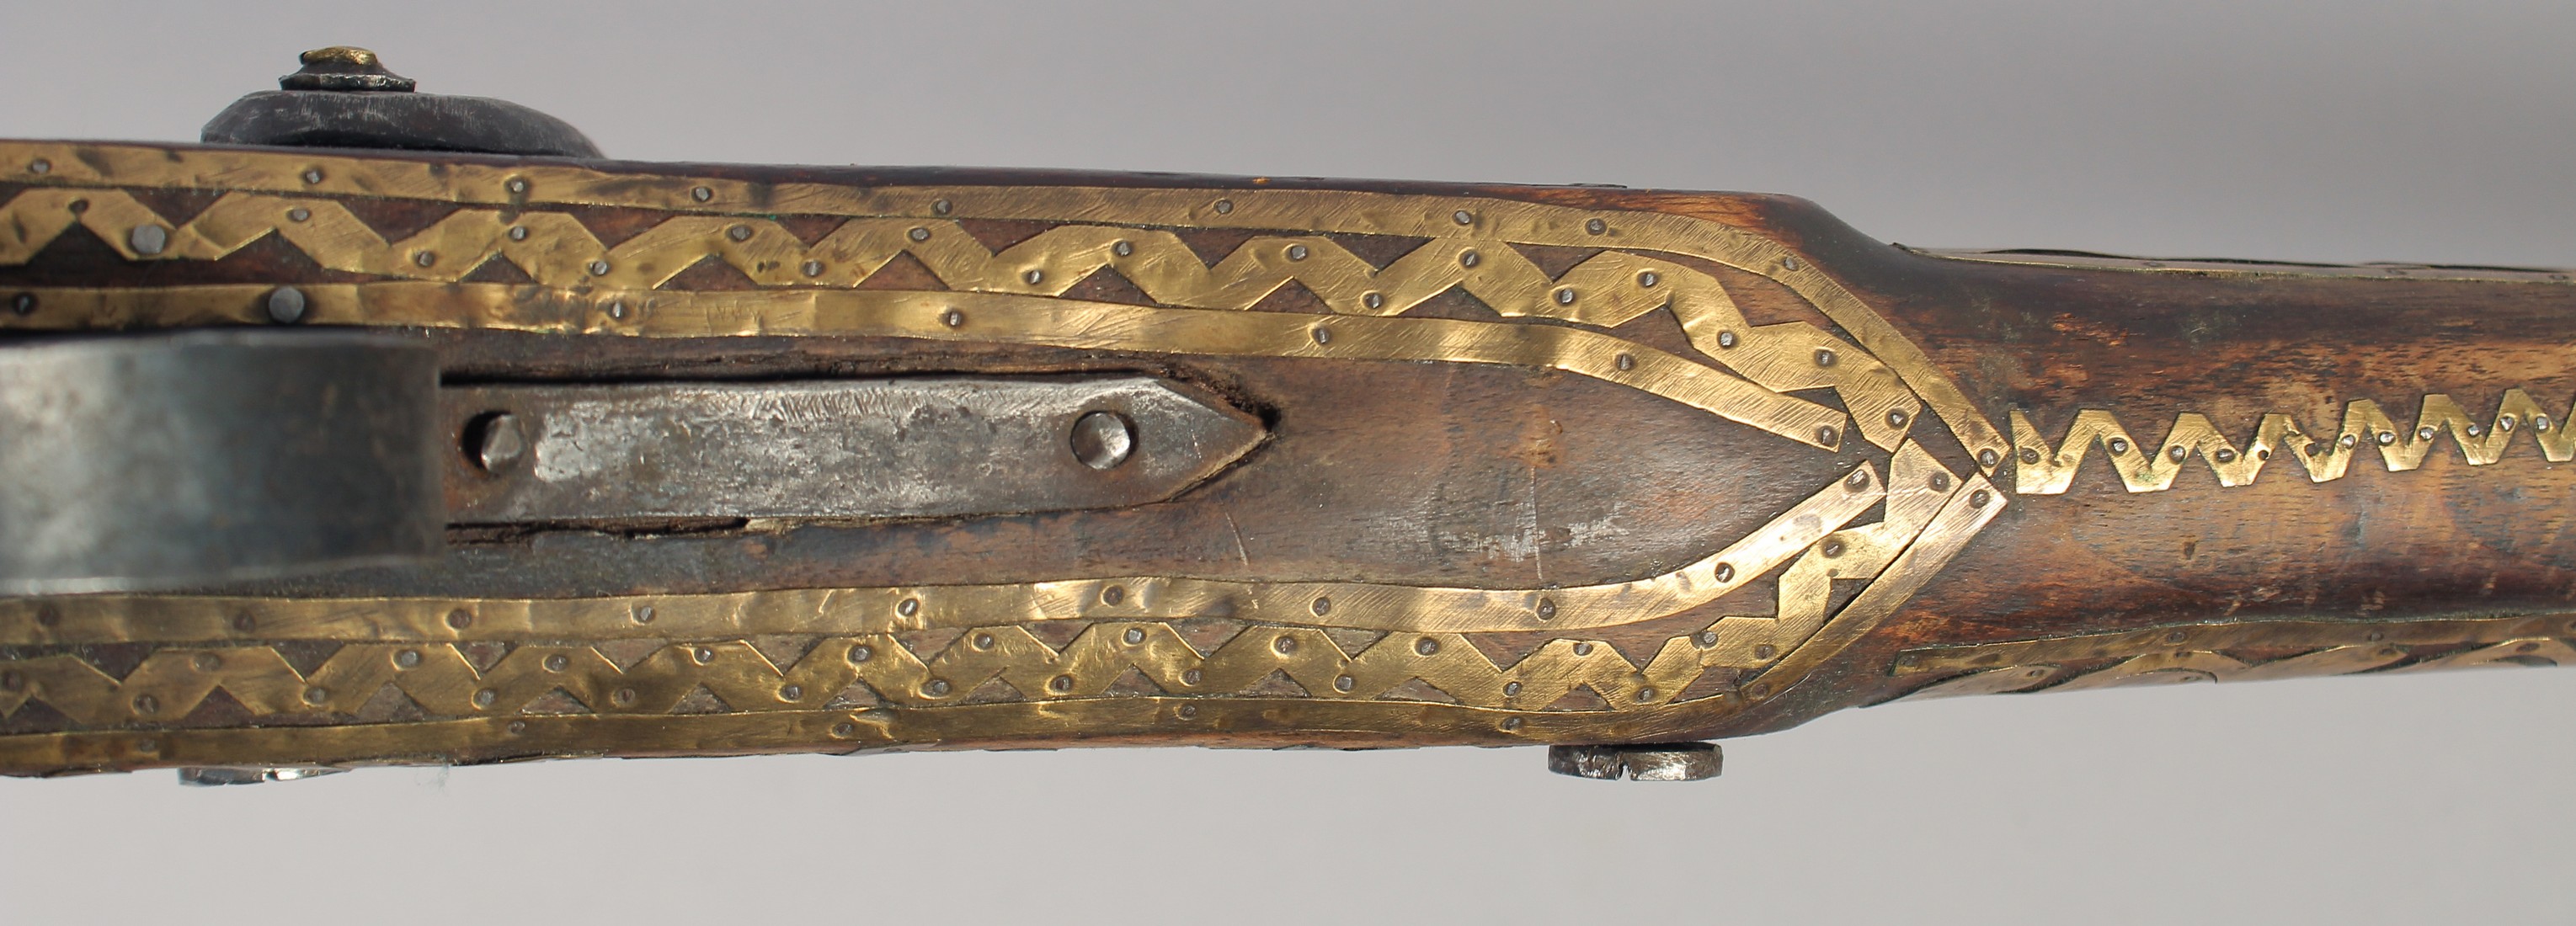 A LATE 19TH CENTURY AFGHAN JEZAIL TYPE RIFLE with later European percussion cap lock mechanism, - Image 9 of 11